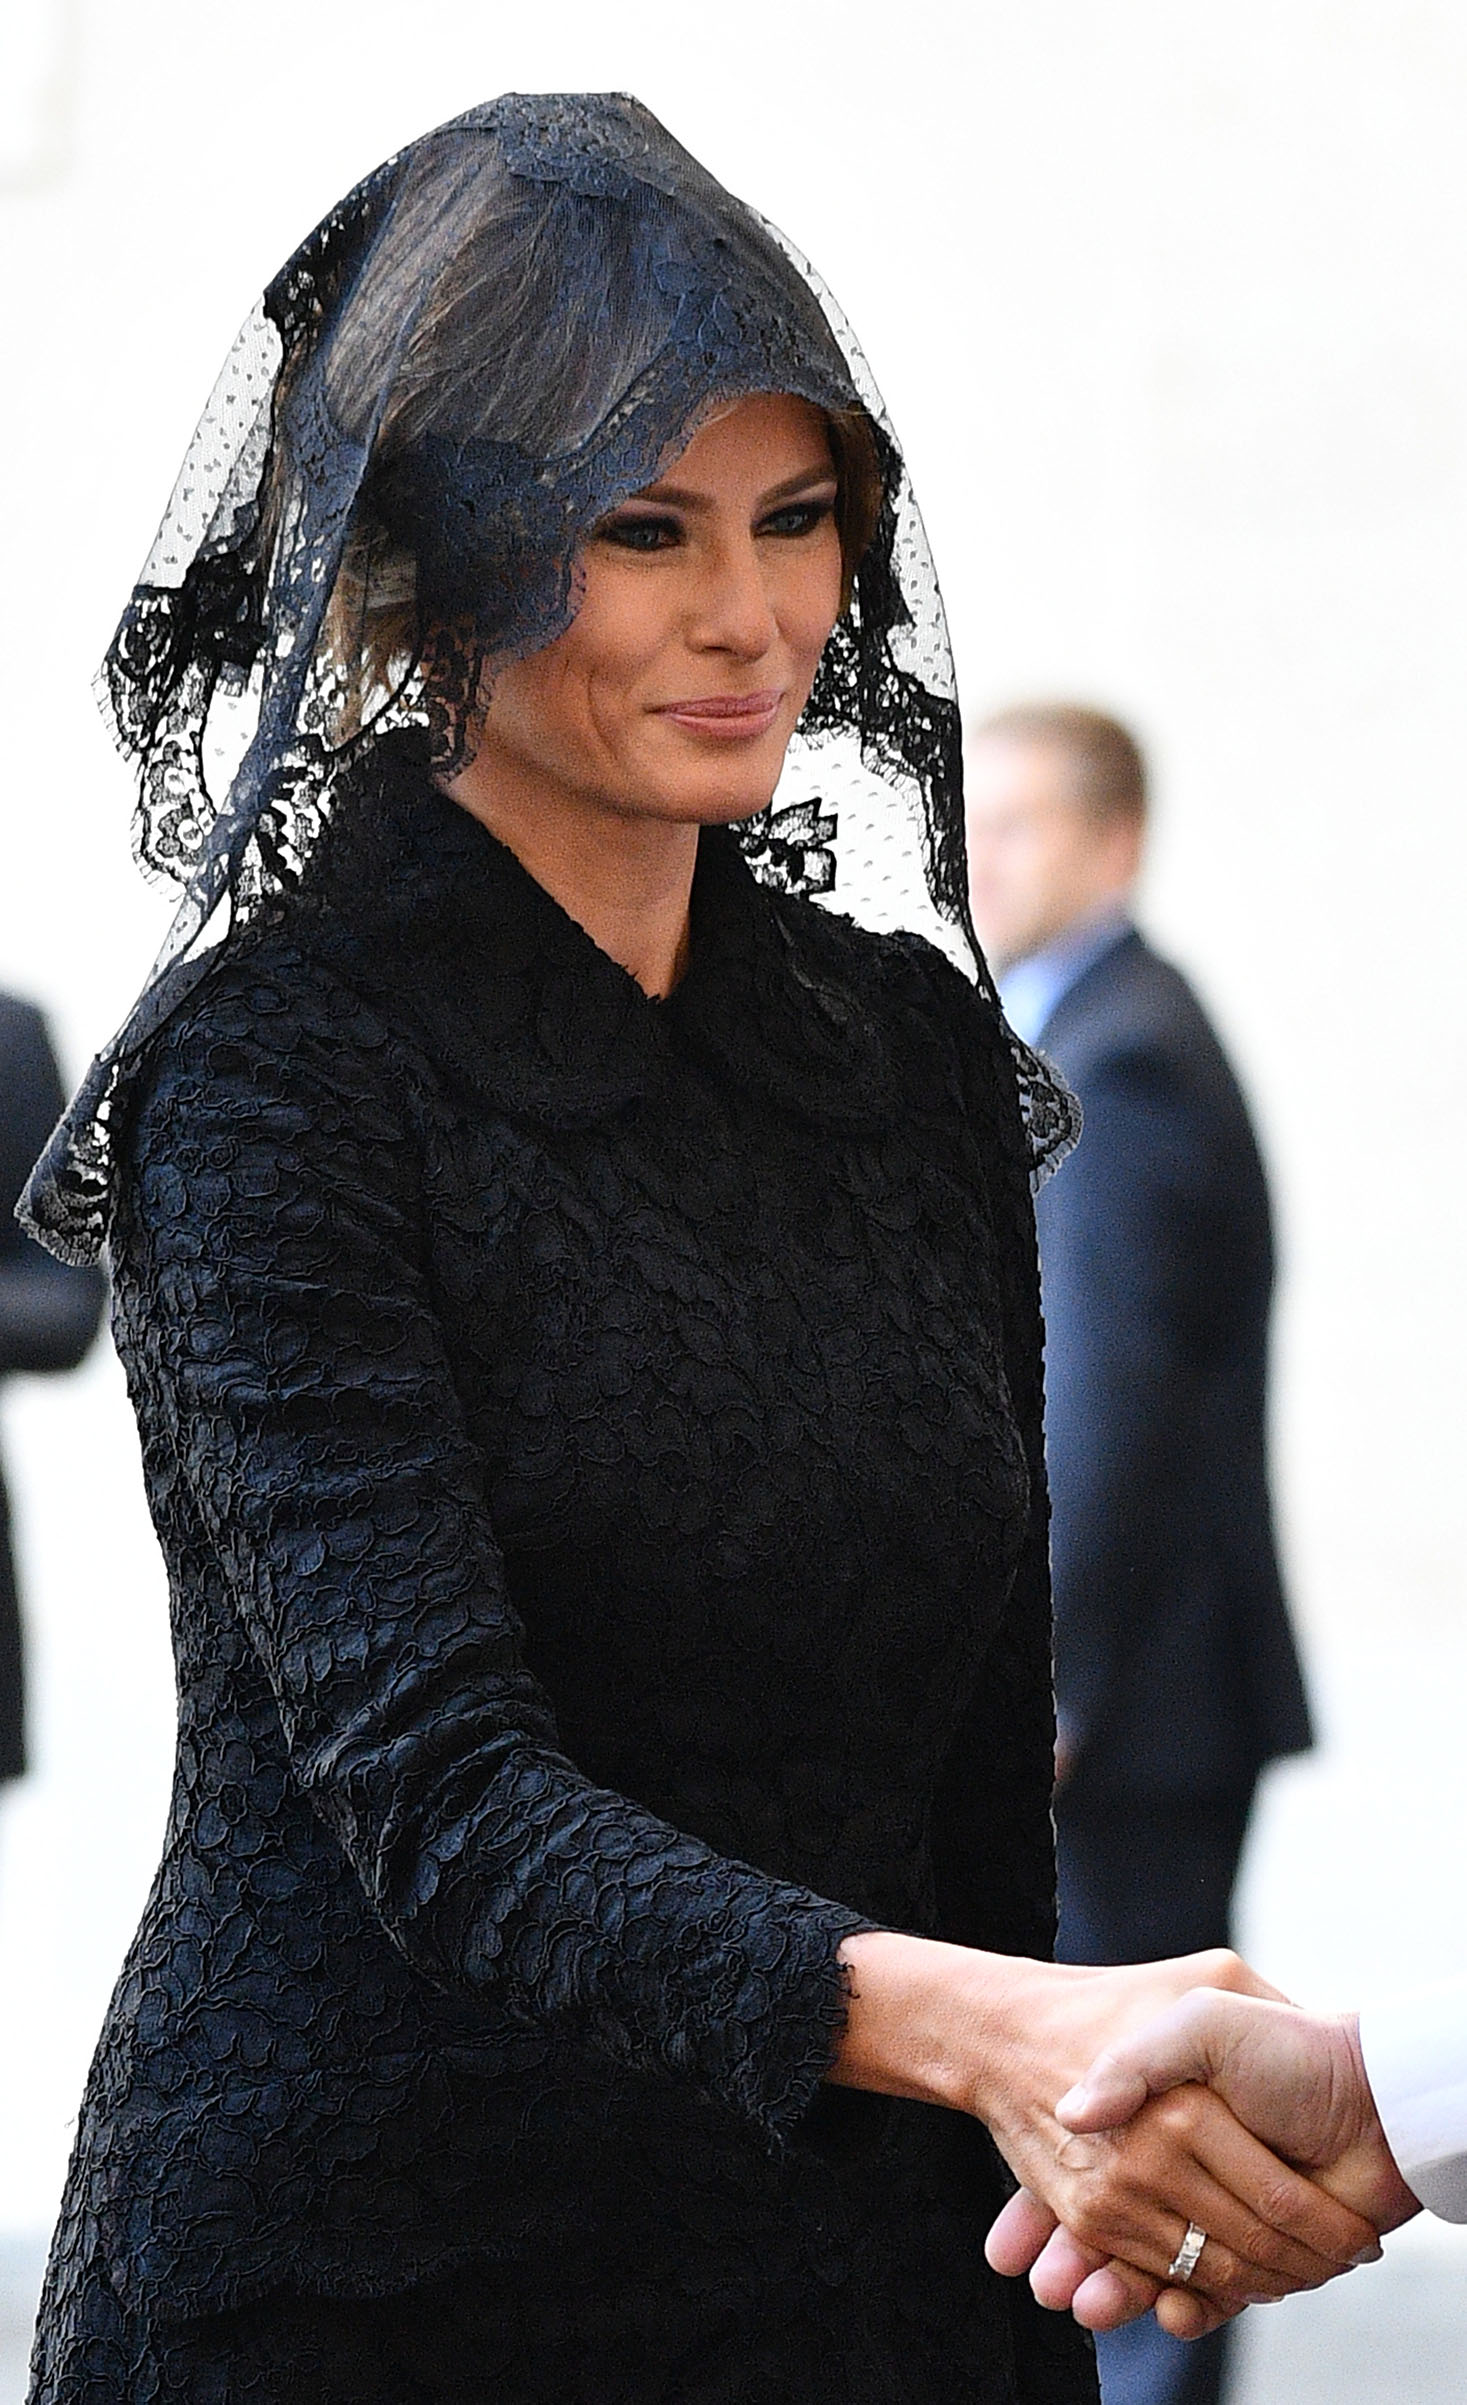 US First Lady Melania Trump wearing a Dolce & Gabbana outfit, arrives at the Vatican prior a private audience of US President Donald Trump with Pope Francis, on May 24, 2017.